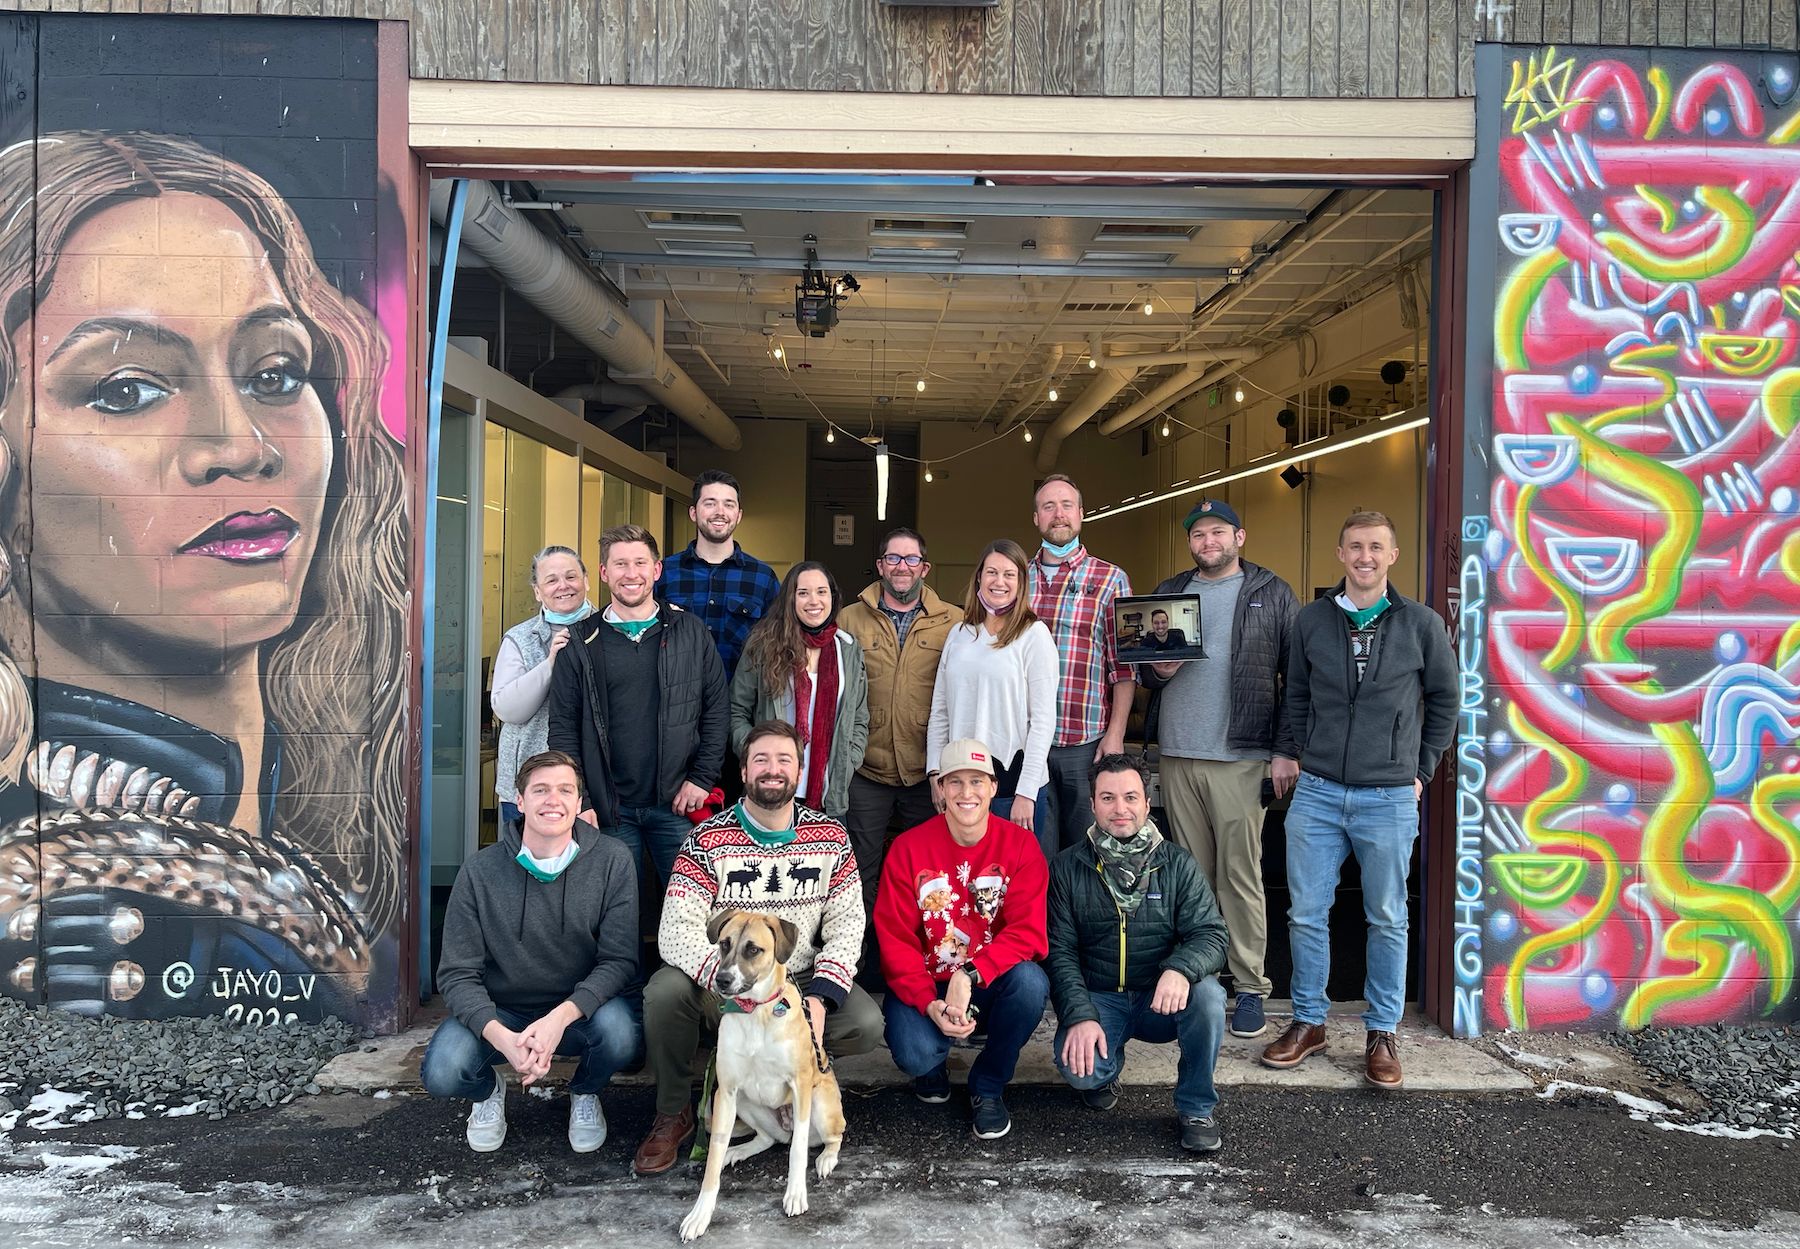 The team at Nomad poses for a photo during the holidays in front of a warehouse space with murals on each side 